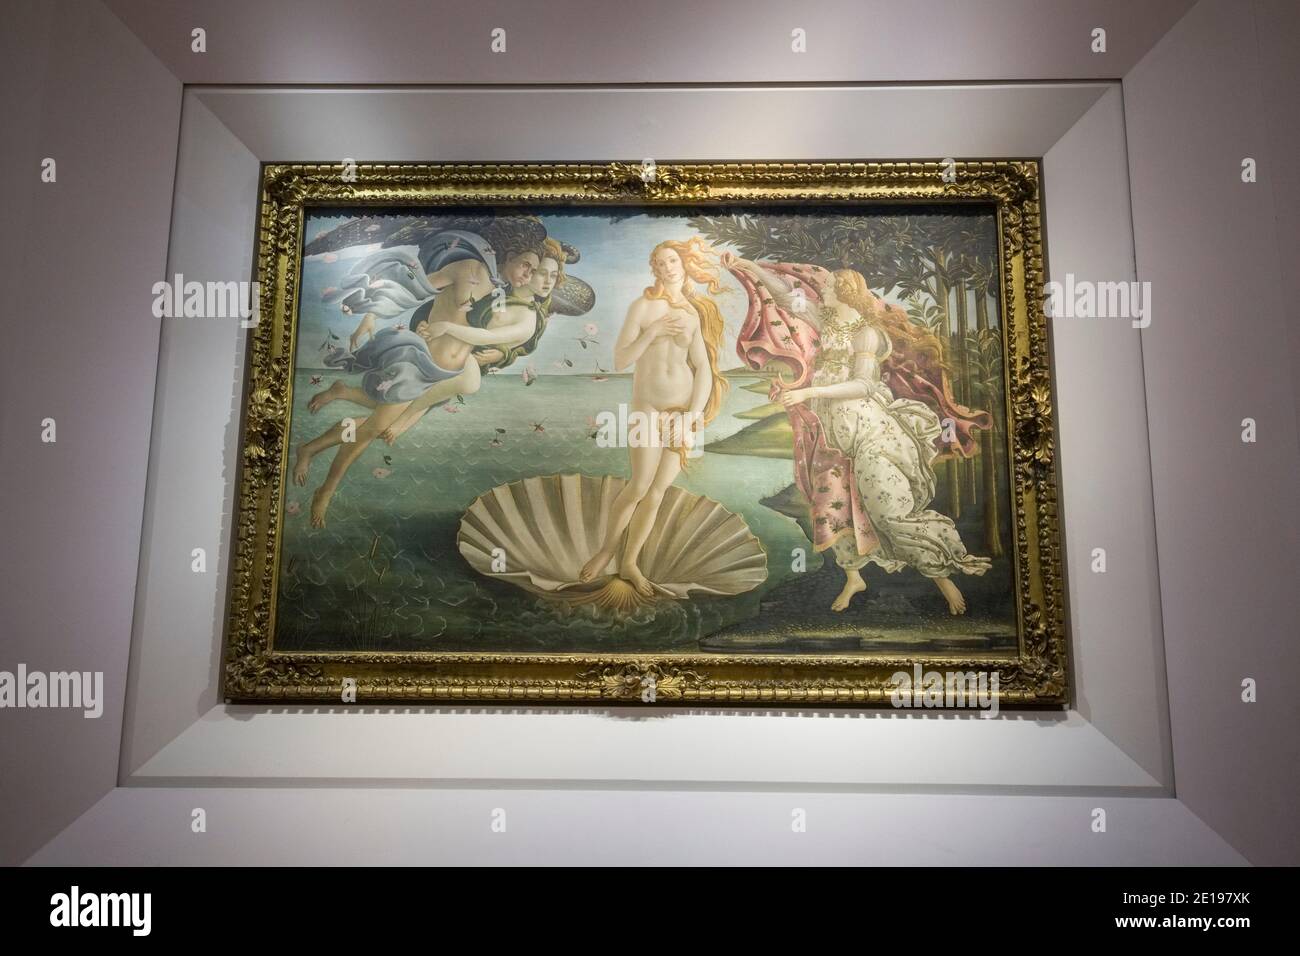 Italy, Tuscany: Florence (Firenze in Italian). The Birth of Venus, a painting by Sandro Botticelli, in the Uffizi Gallery Stock Photo